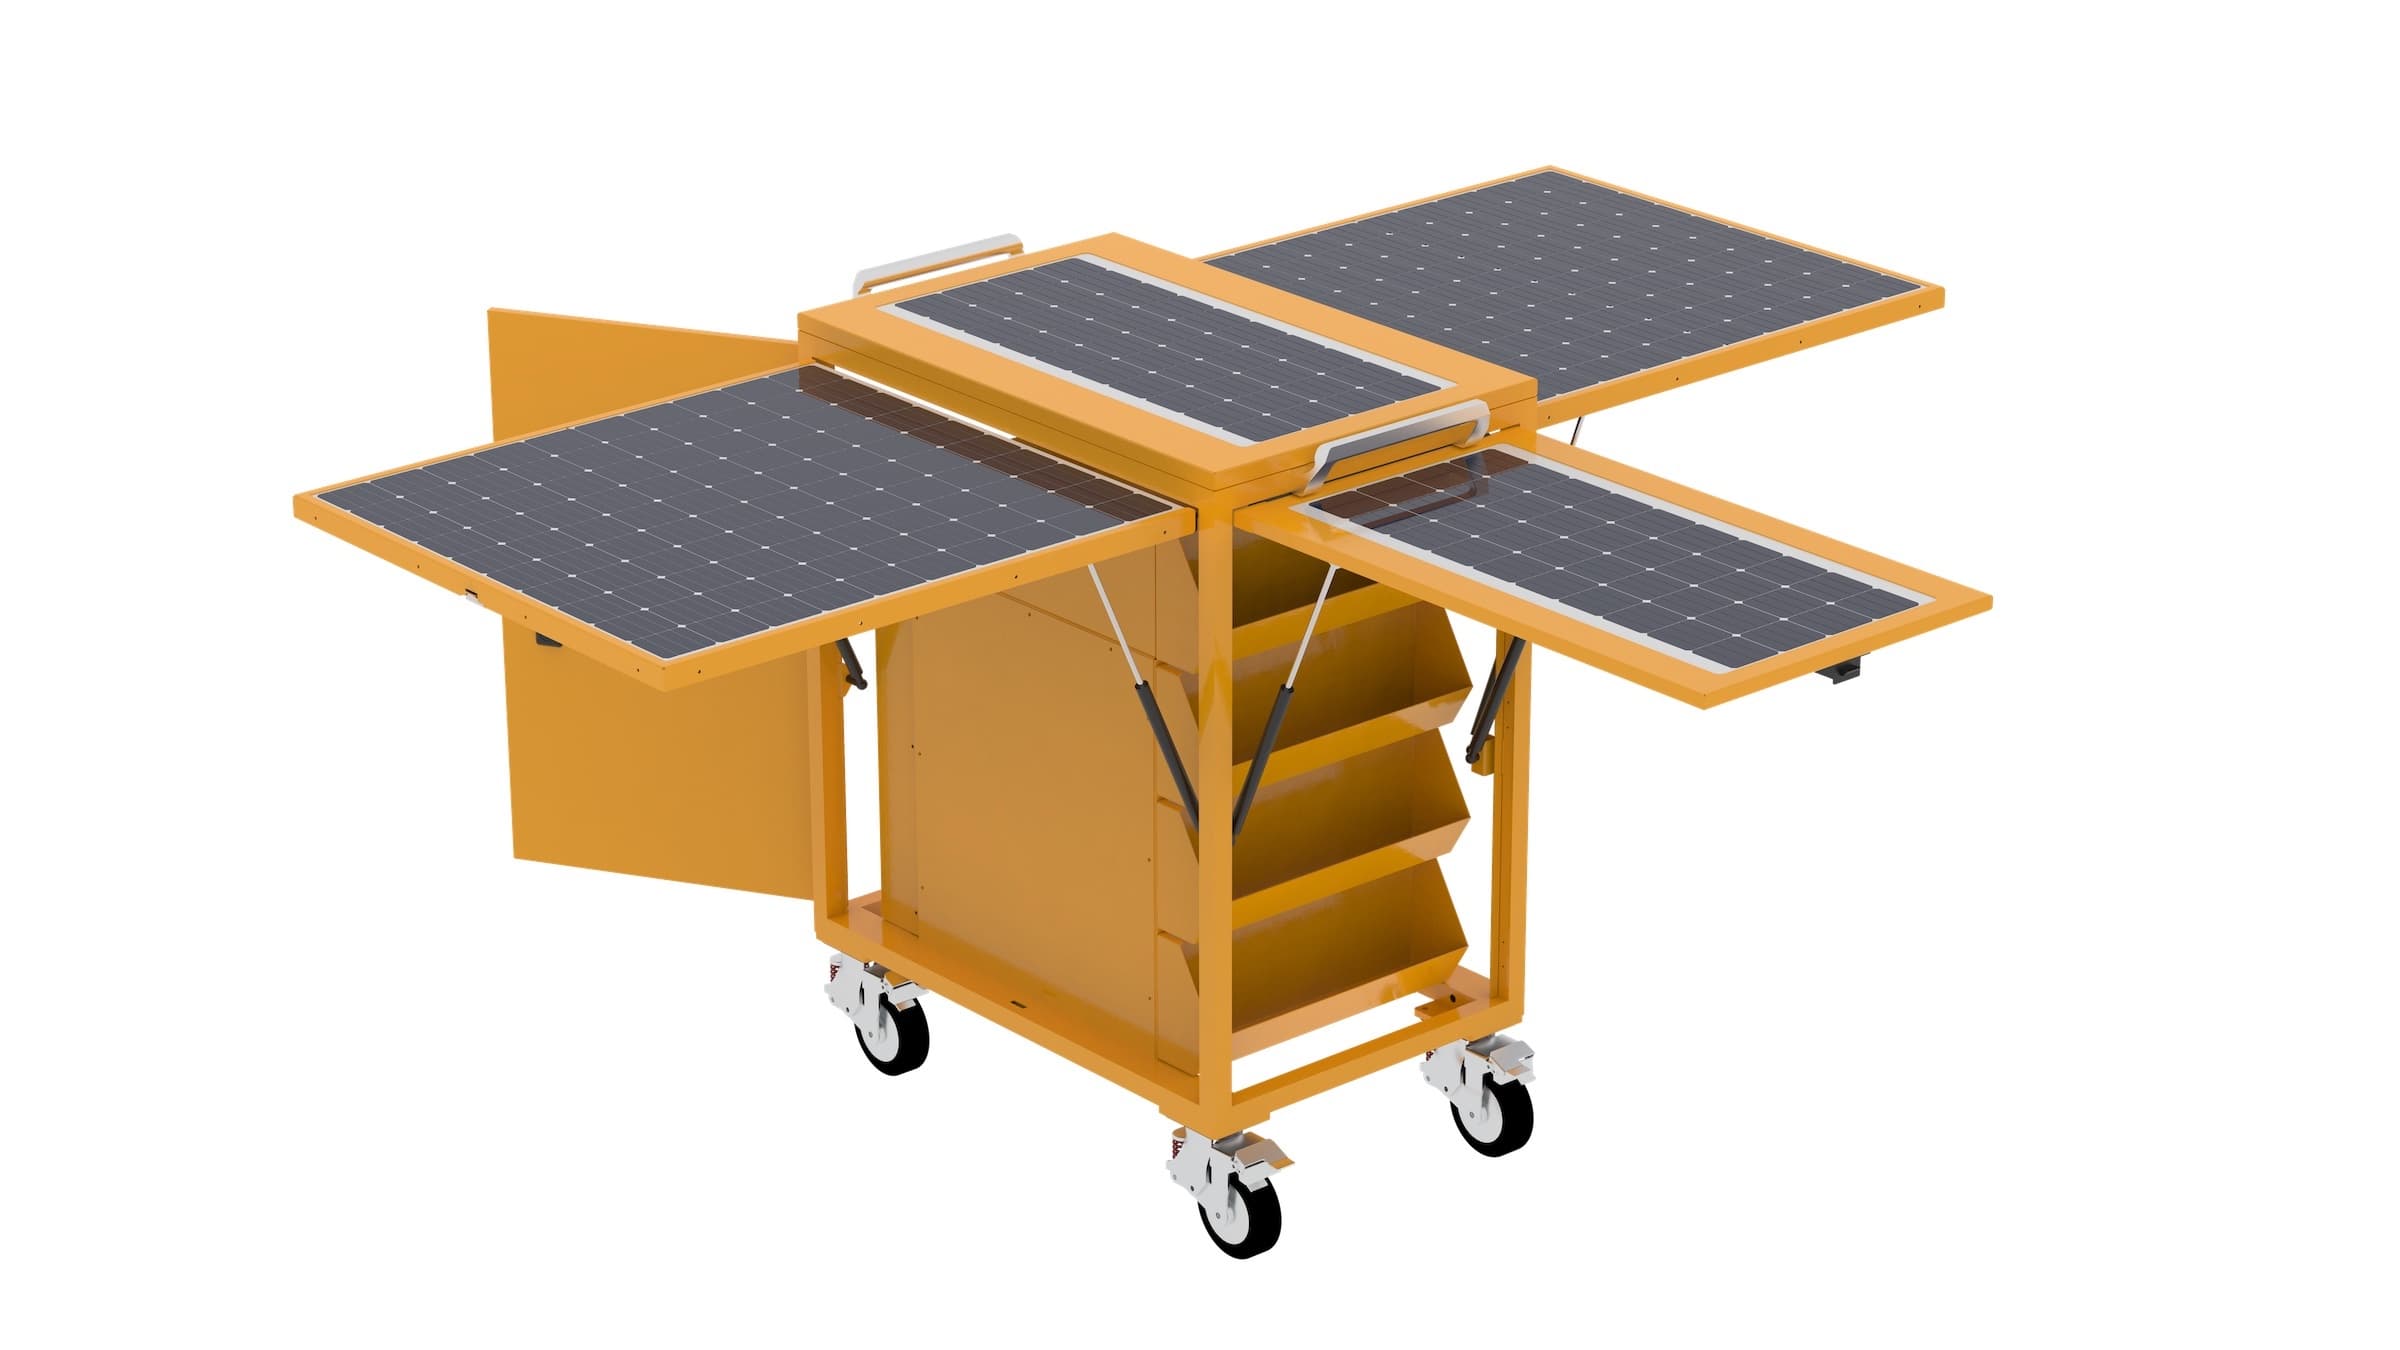 The Benefits Of Portable Solar Power For Offgrid Living